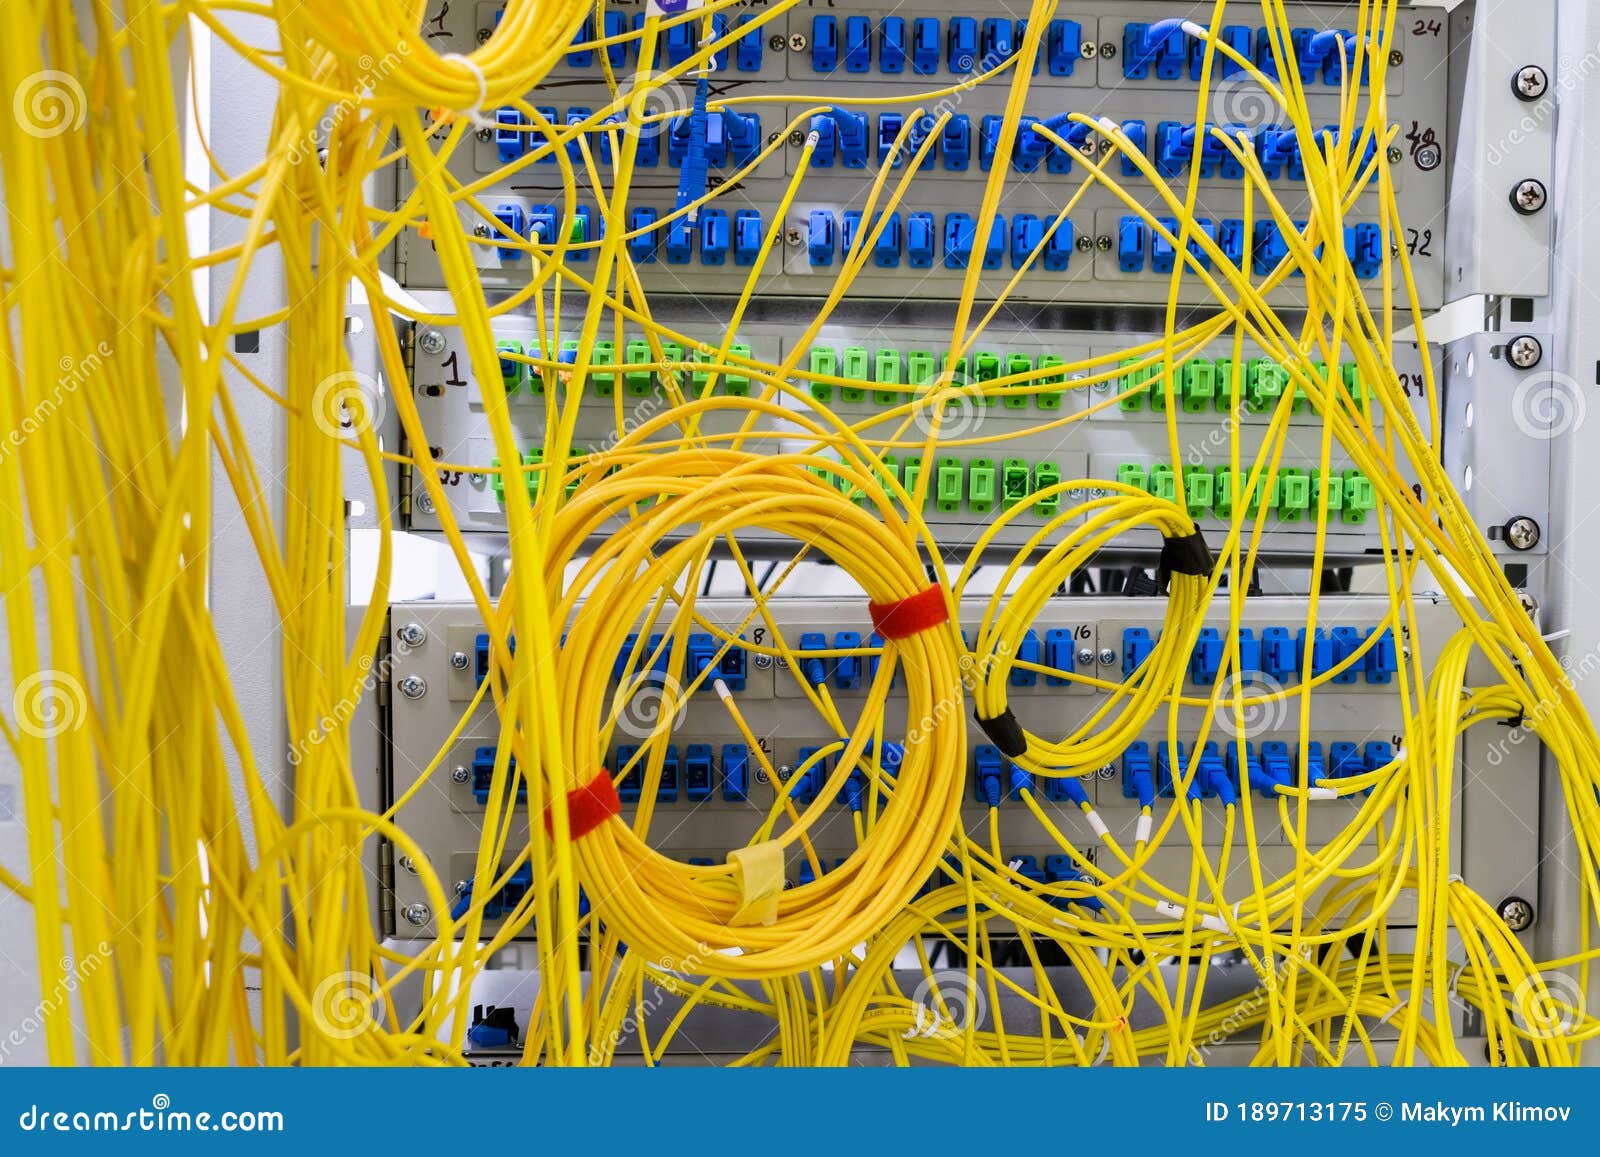 switching panal with a plurality of optical cables is in the server room